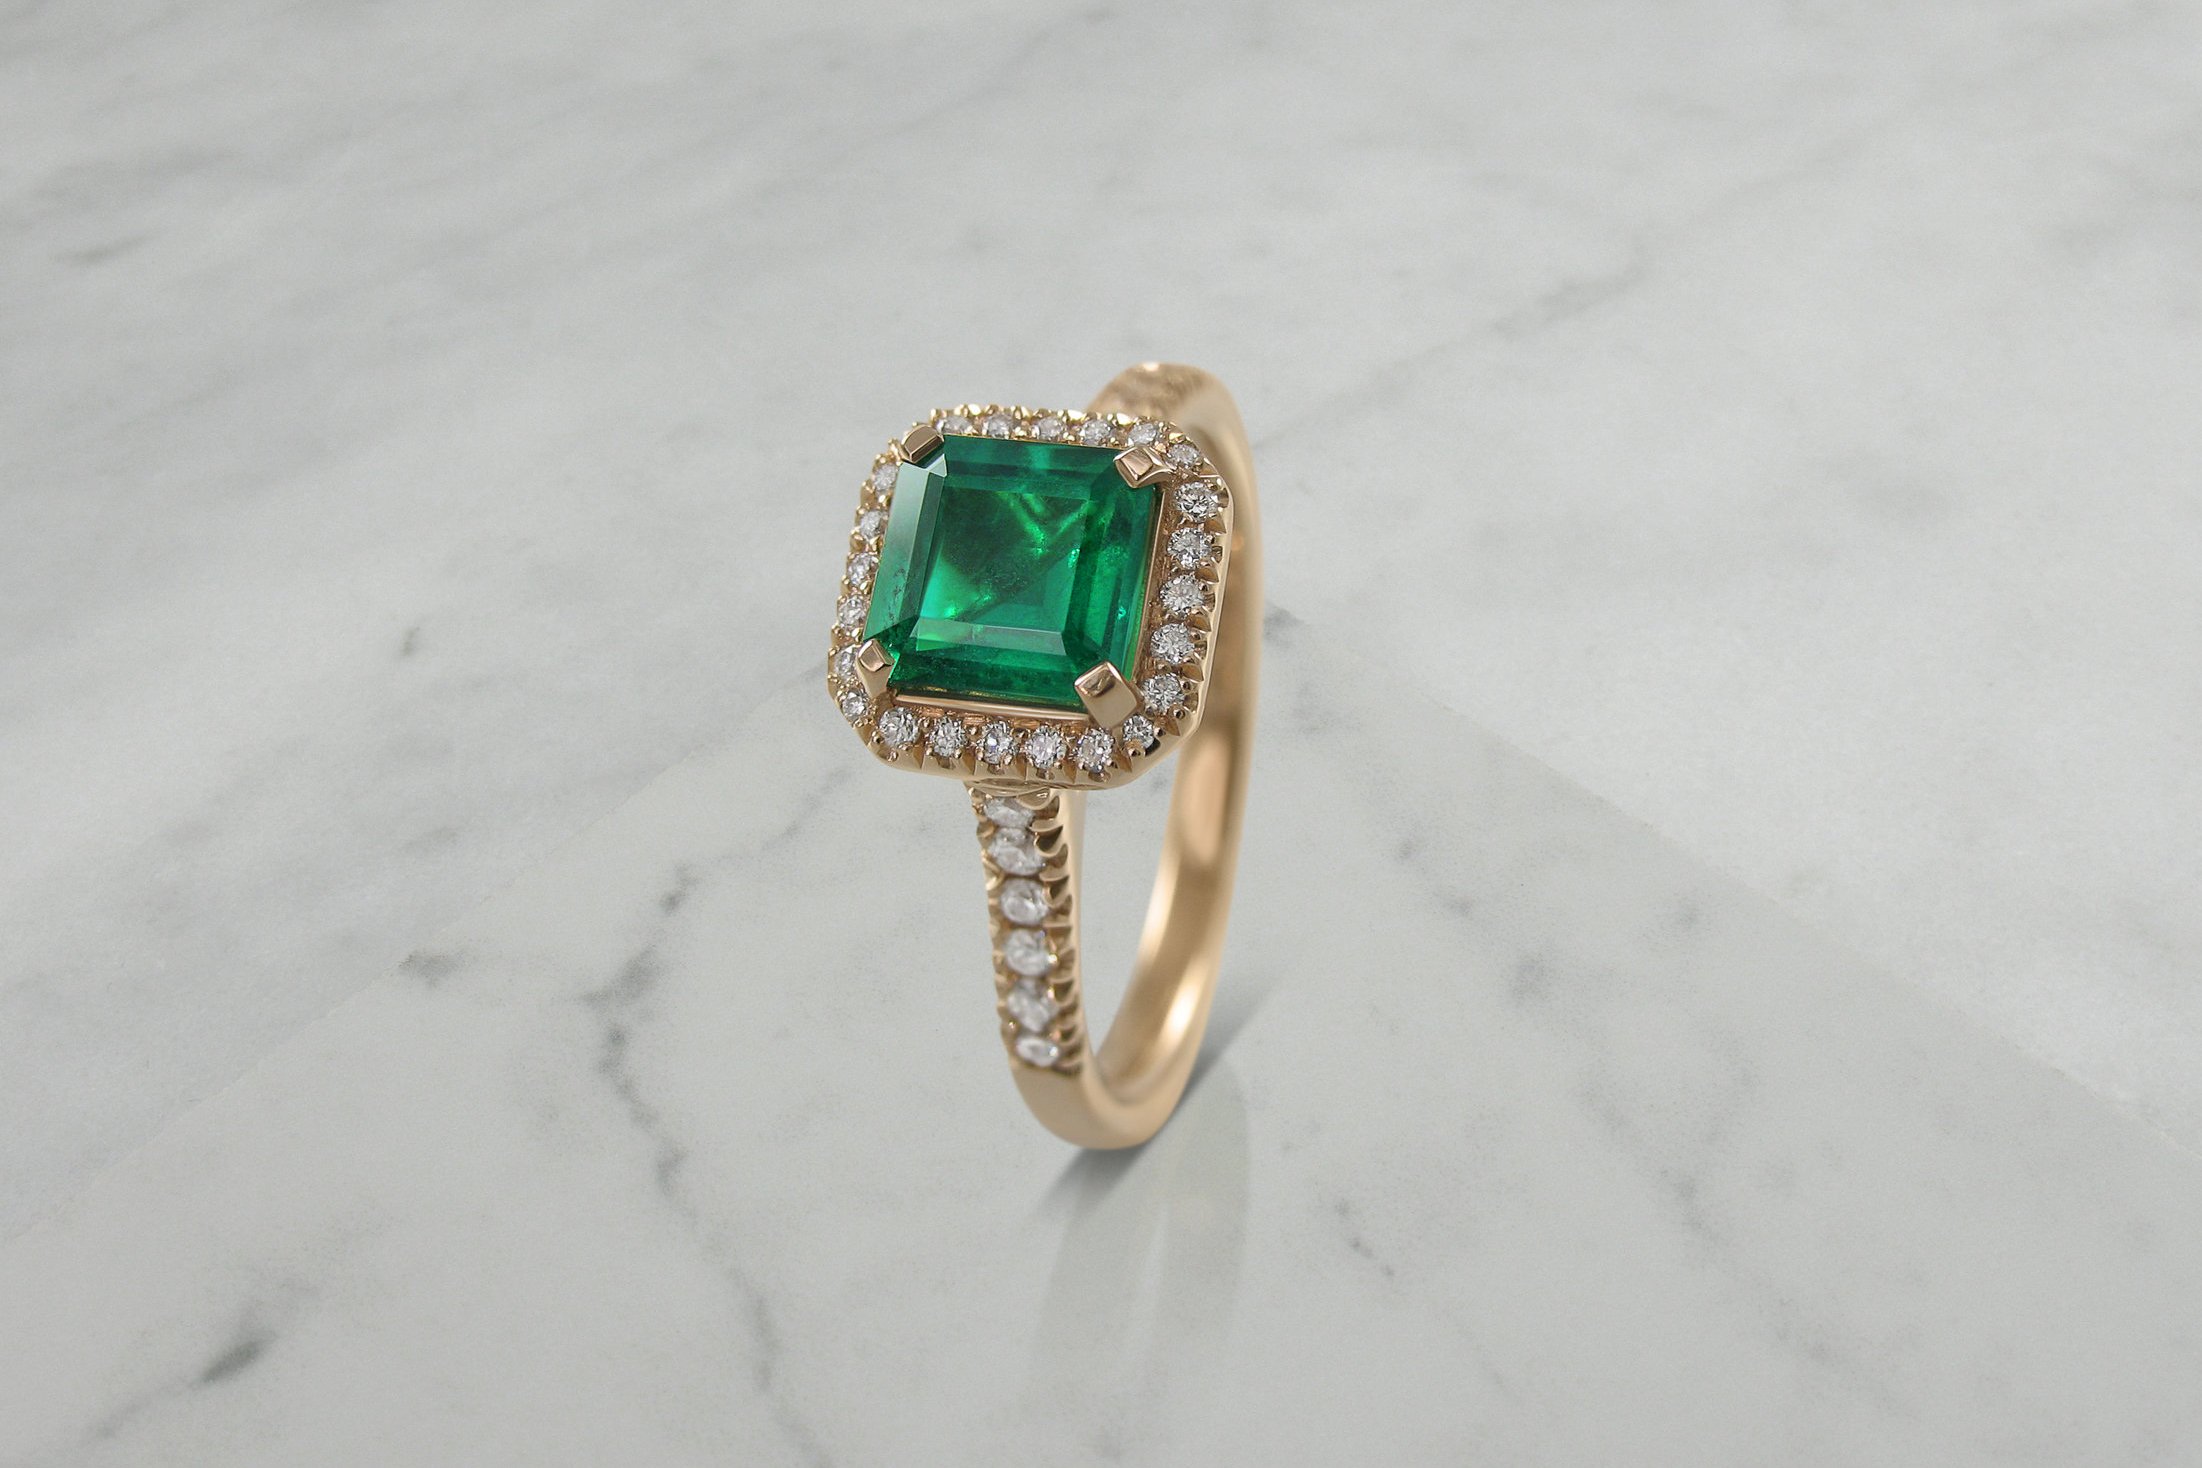 Emerald and diamond rose gold halo engagement ring